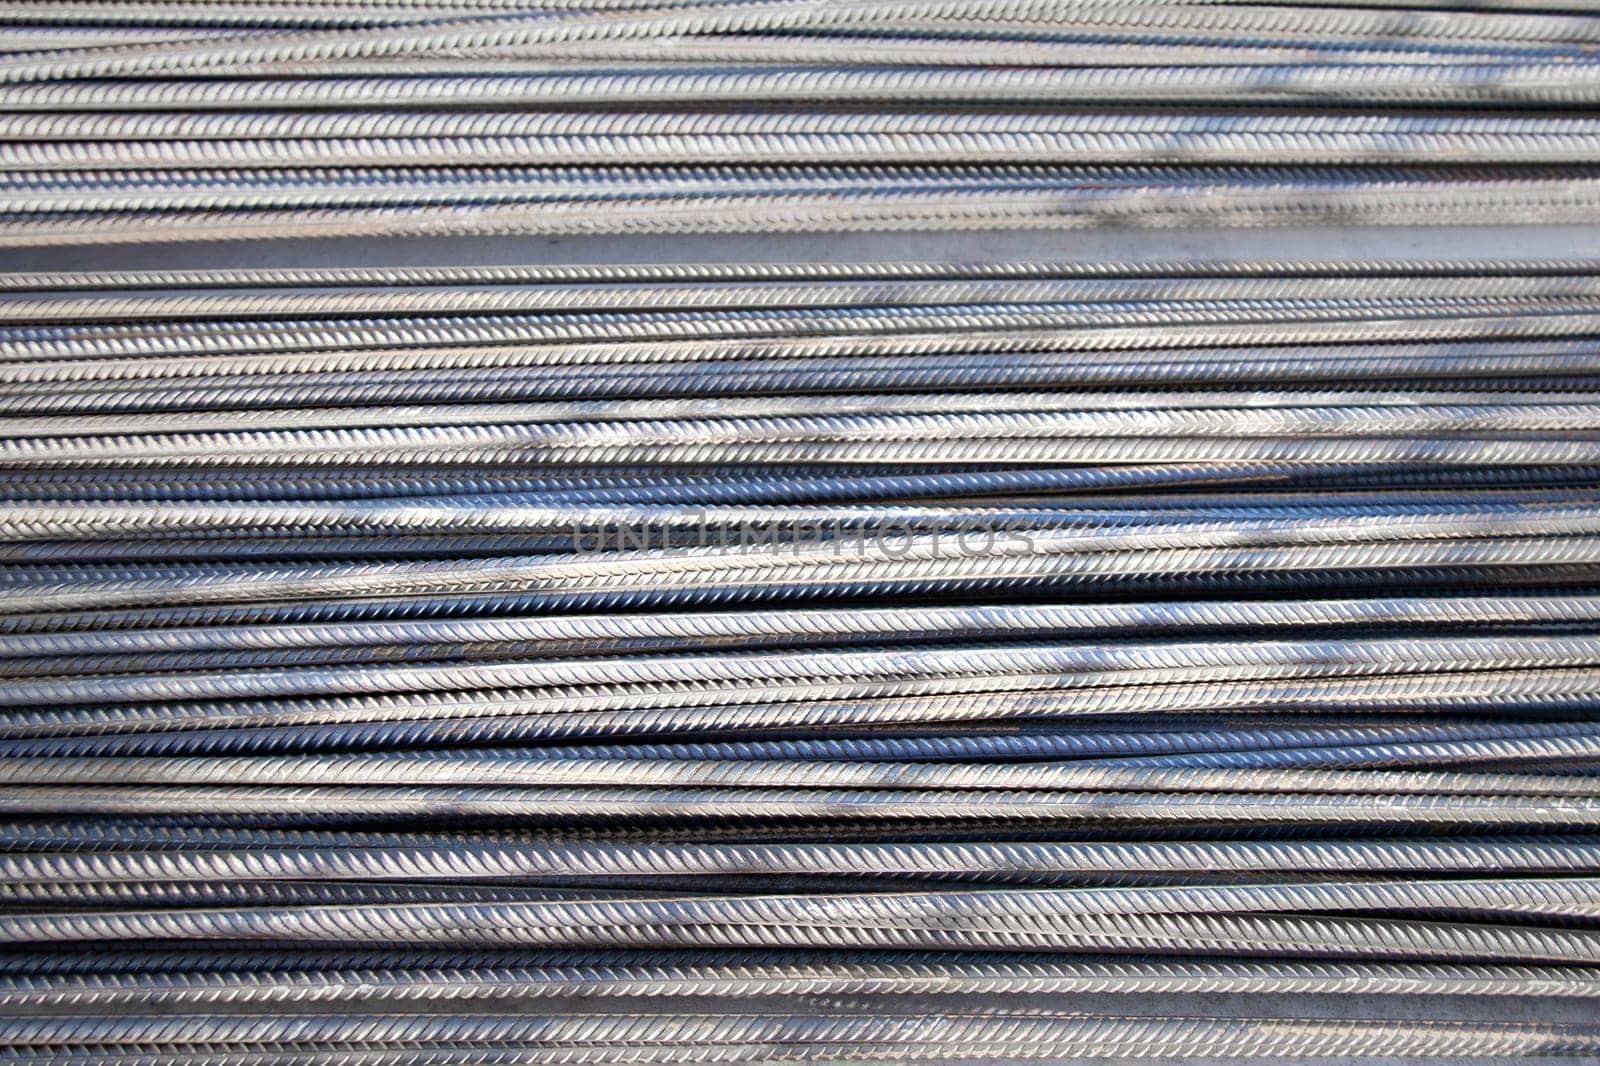 Reinforced Steel: Background of Metal and Iron Fittings, New Gray Armature Bars by Rom4ek